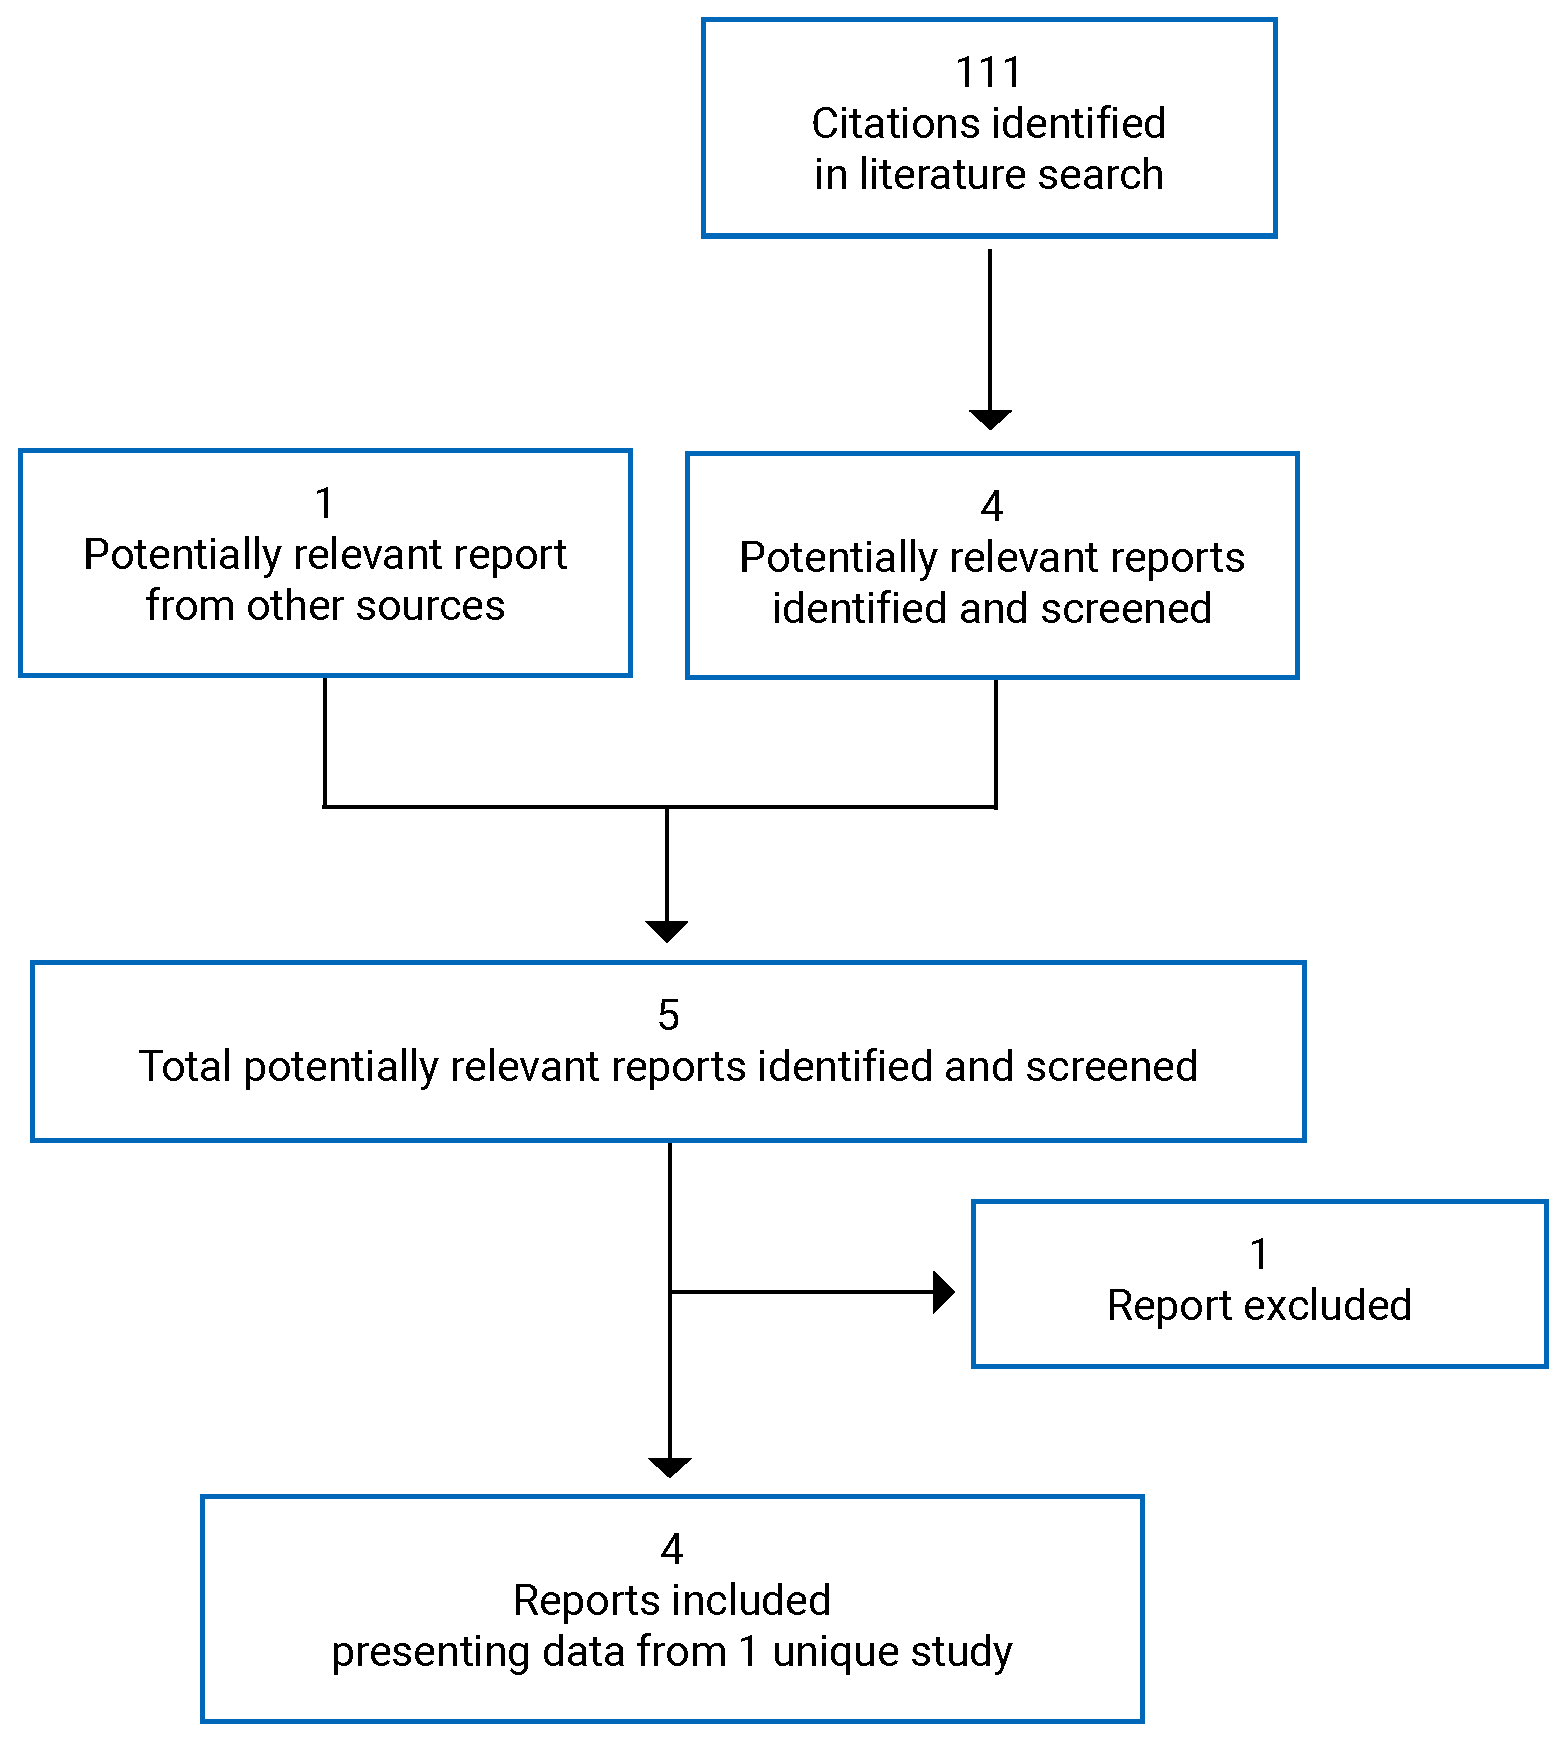 A total of 111 citations were identified in the literature search, of which 4 were deemed to be potentially relevant. One additional potentially relevant report was identified from other sources. Of the 5 potentially relevant full-text reports retrieved for scrutiny, 1 was excluded. Finally, 4 reports presenting data from 1 unique study were included in the review.